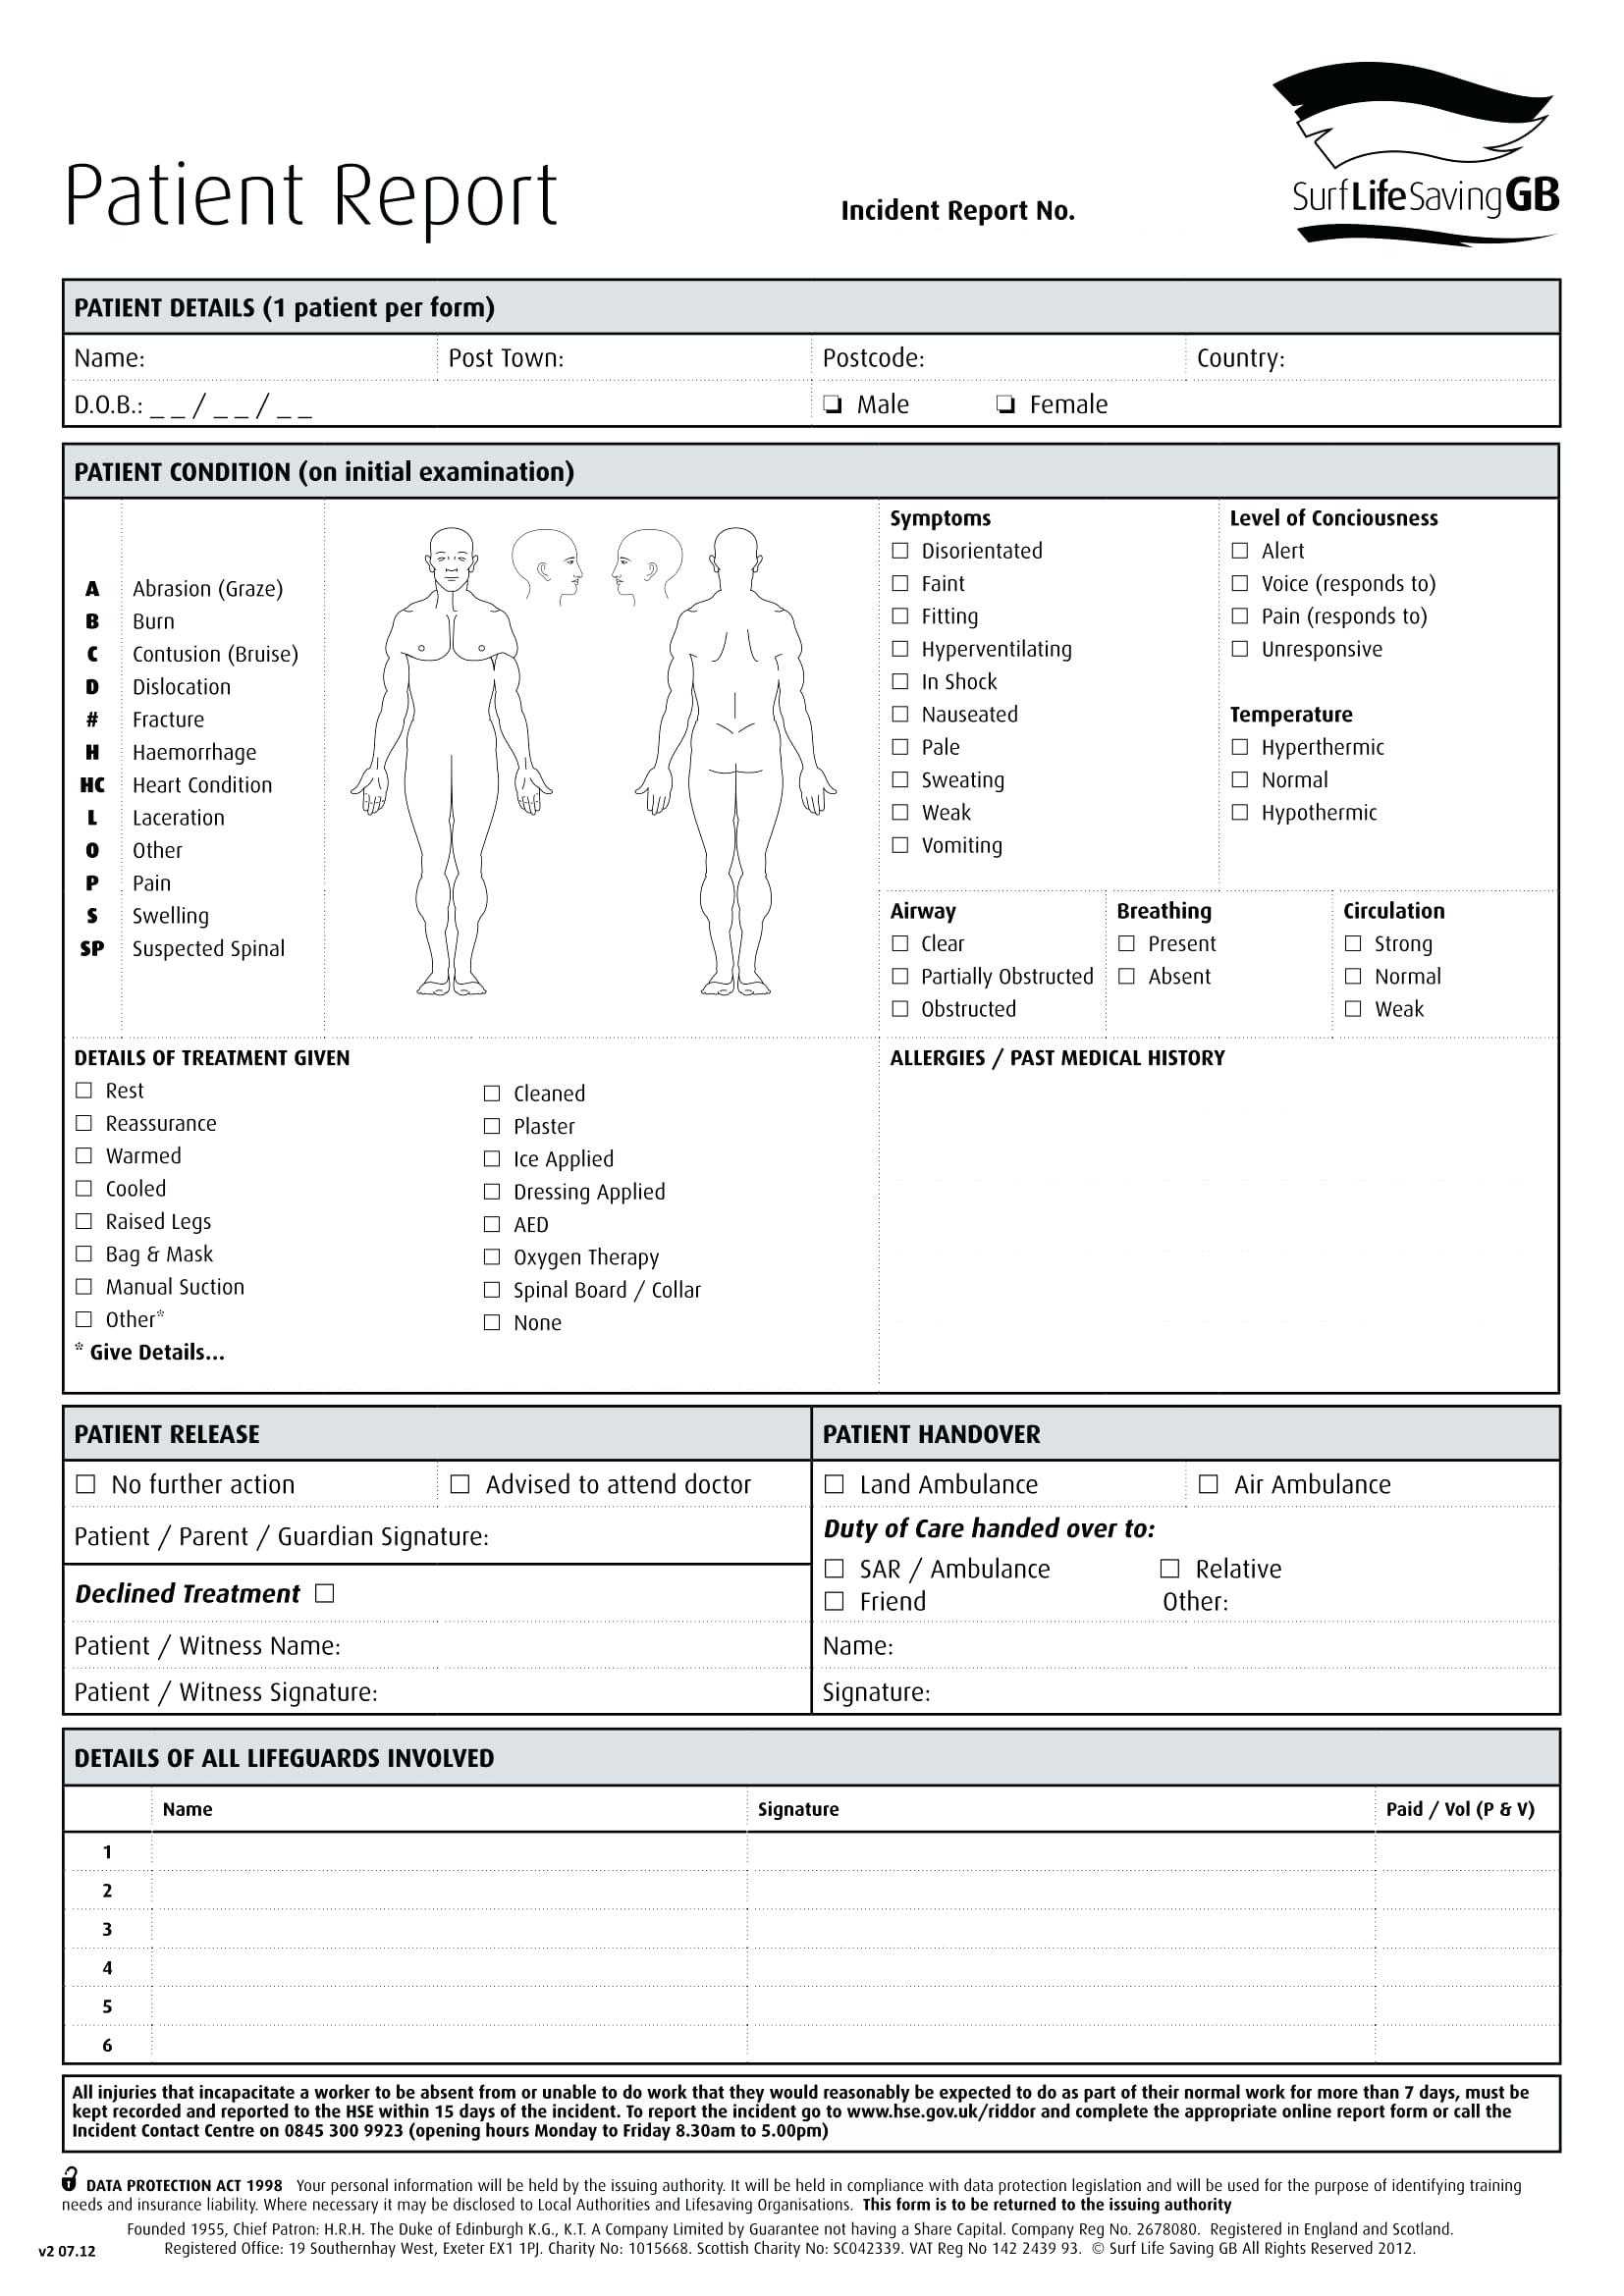 Incident Report Form Template Free Download – Vmarques Regarding Incident Report Template Microsoft